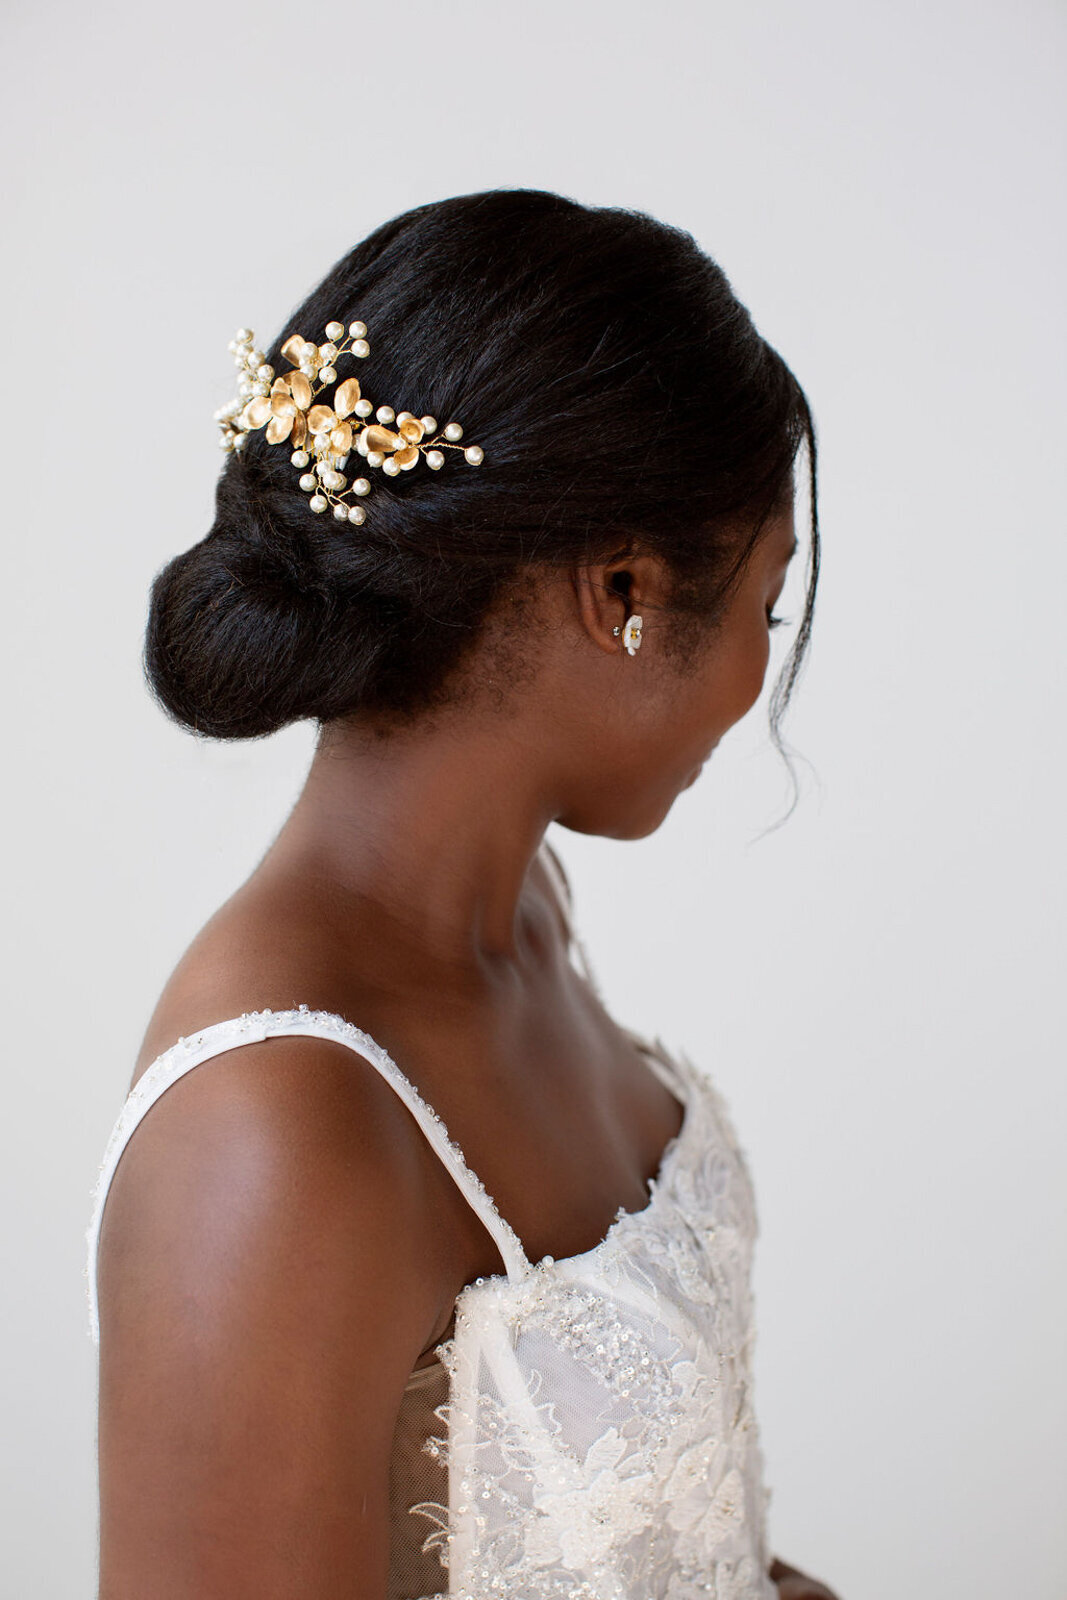 Elegant gold and pearl bridal hairpiece, by Joanna Bisley Designs, romantic and modern wedding jeweler based in Calgary, Alberta.  Featured on the Brontë Bride Vendor Guide.